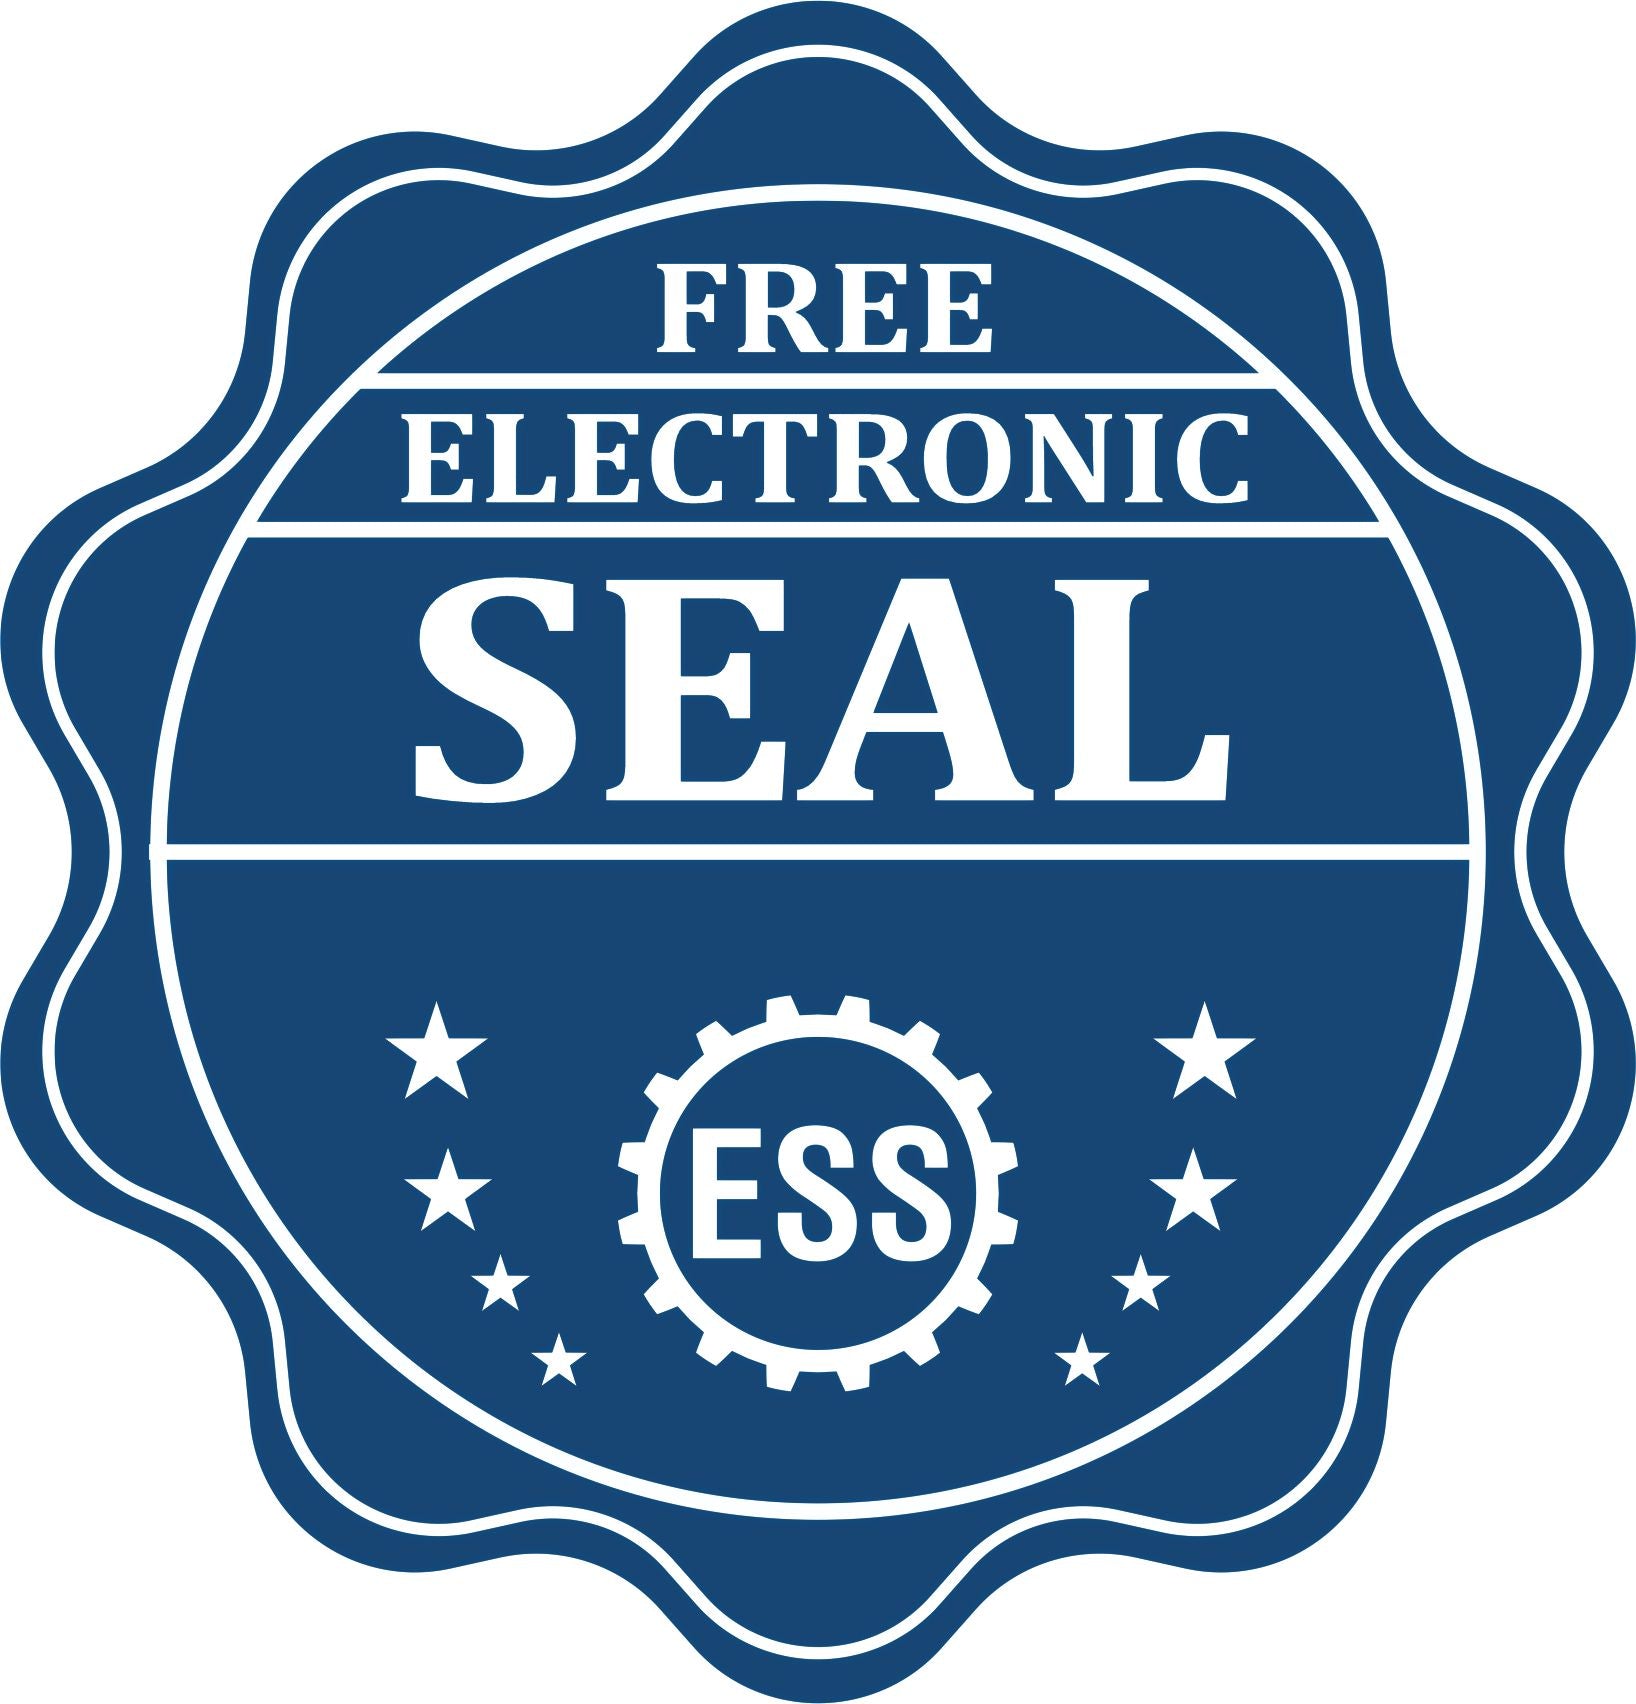 A badge showing a free electronic seal for the Gift North Dakota Engineer Seal with stars and the ESS gear on the emblem.